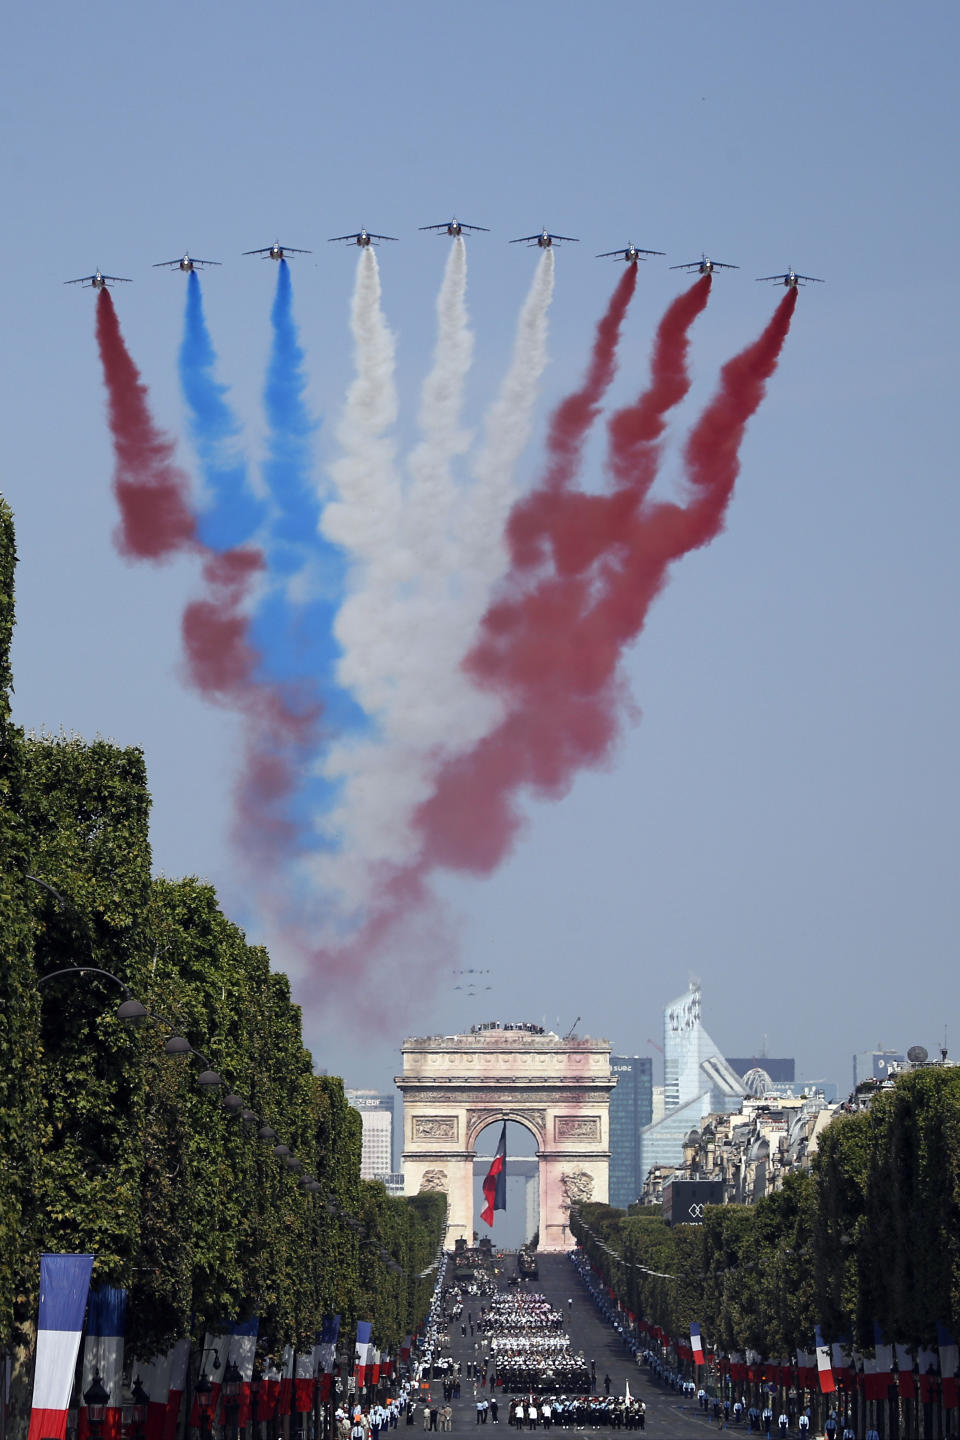 <p>French Alphajets of the Patrouille de France fly over the Champs-Élysées, with the Arc de Triomphe in background, during the Bastille Day parade in Paris, France, Saturday, July 14, 2018. (Photo: Francois Mori/AP) </p>